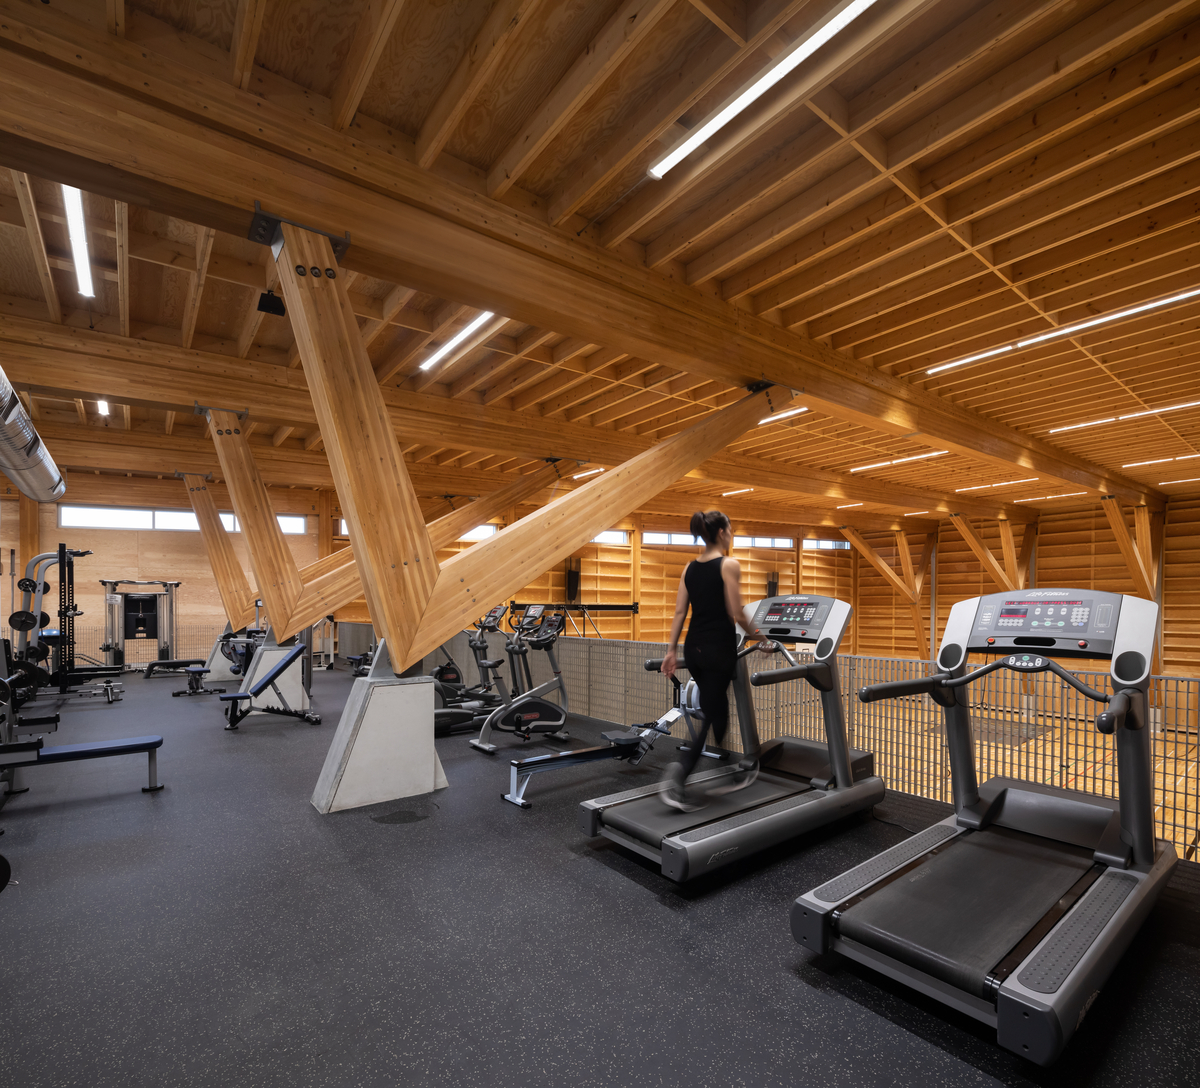 Full span glue laminated timber beams and columns support the roof in this interior view of the Upper Skeena Recreation Centre taken from the occupied 2nd floor exercise area